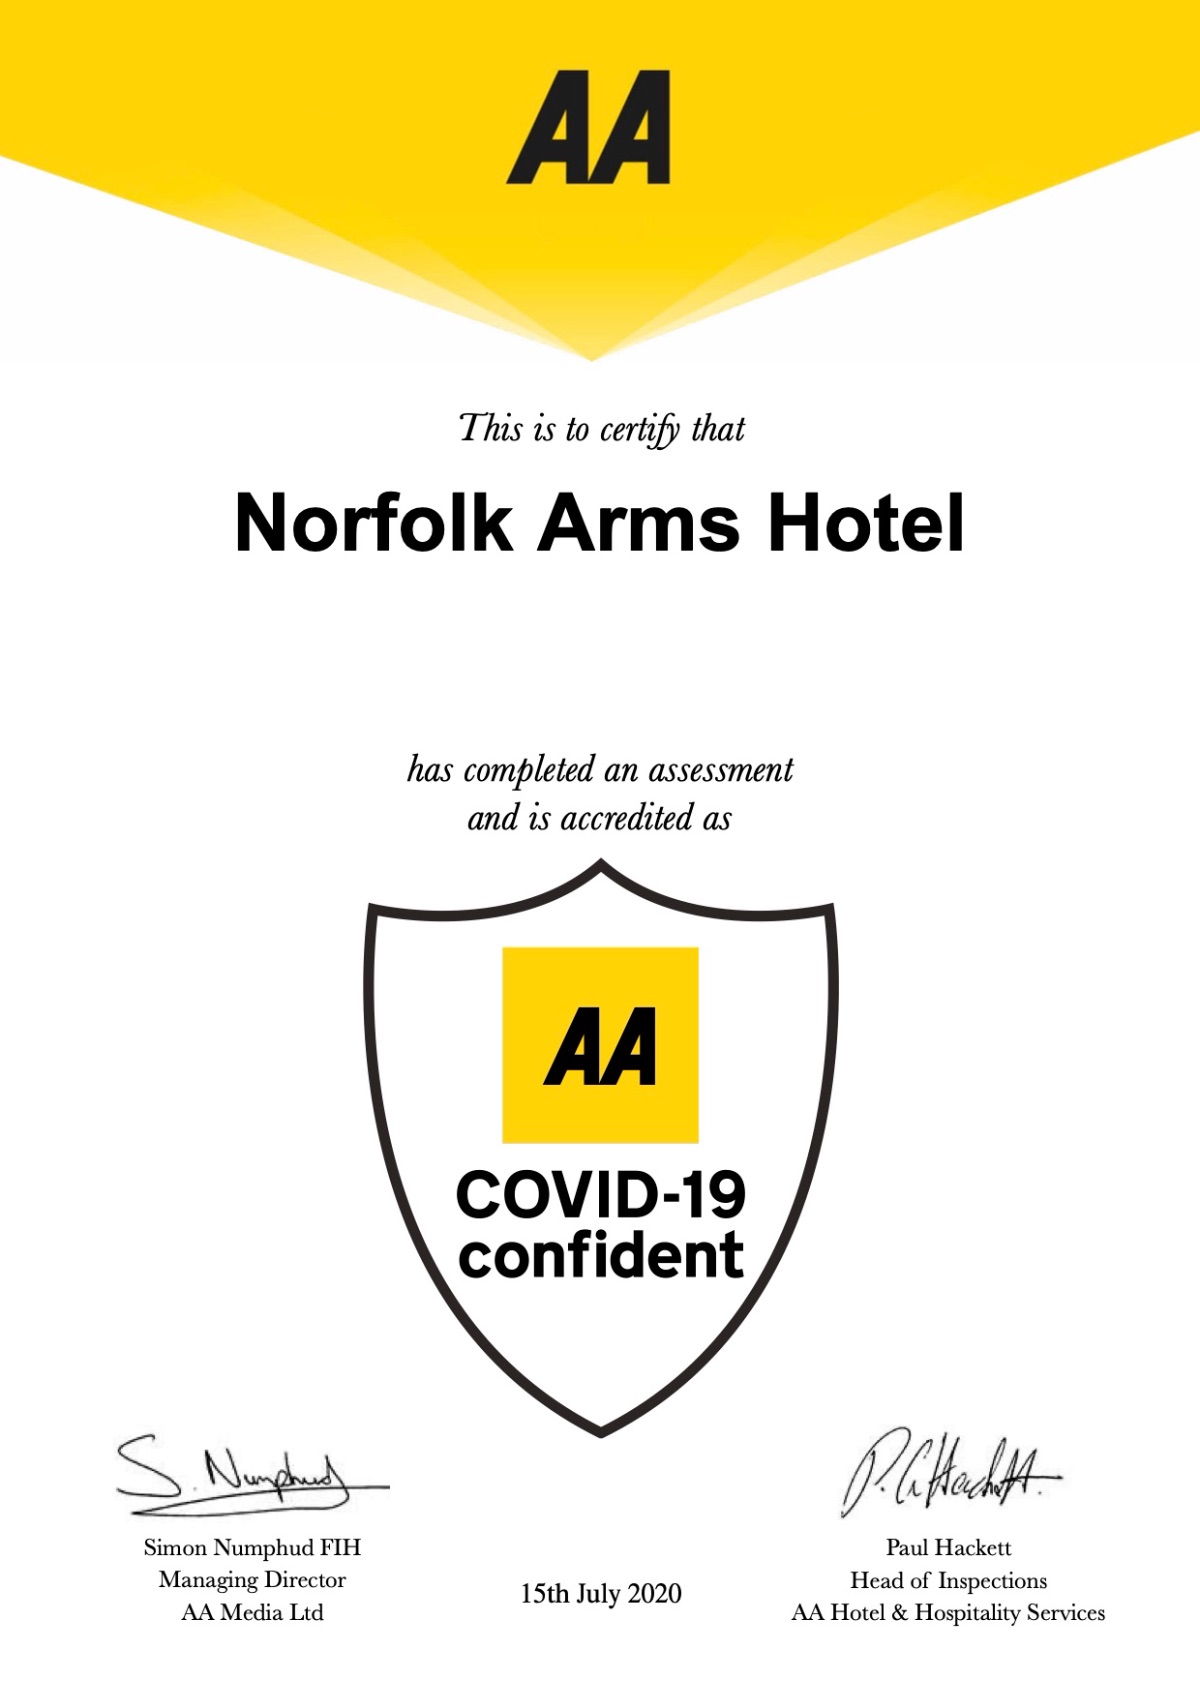 Your health and safety is always at the forefront of our minds and with the hard work that has gone into being Covid secure we are pleased to say we have been accredited with the AA Covid-19 Confident.